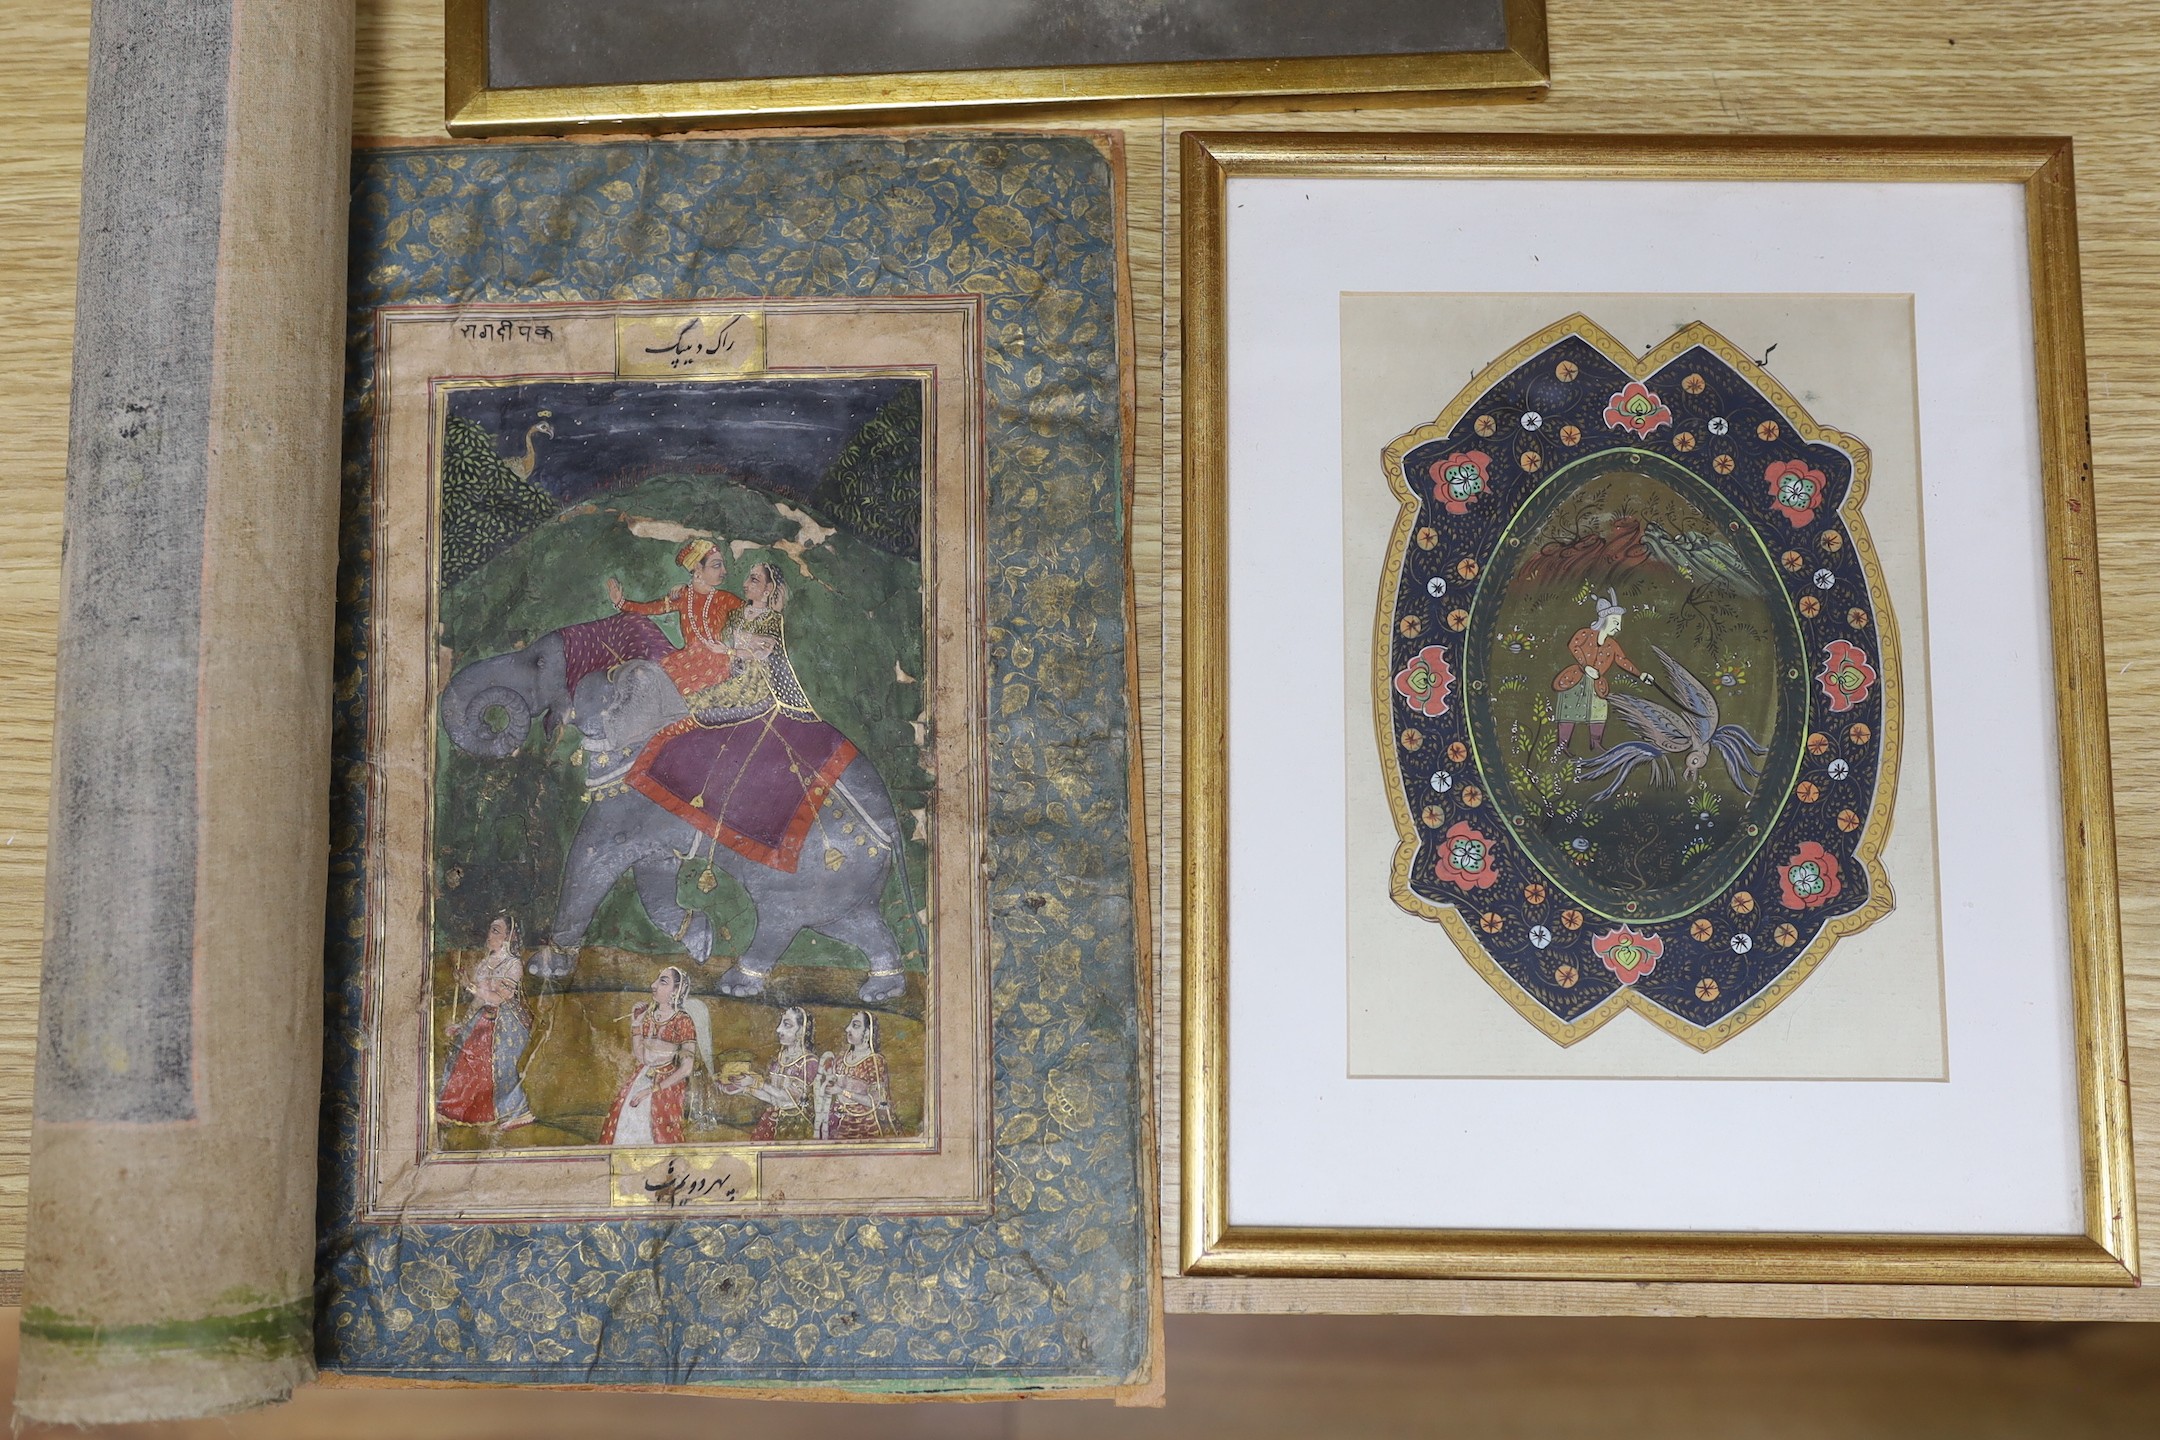 An Indian painted silk panel, two framed Persian paintings and another unframed painting.